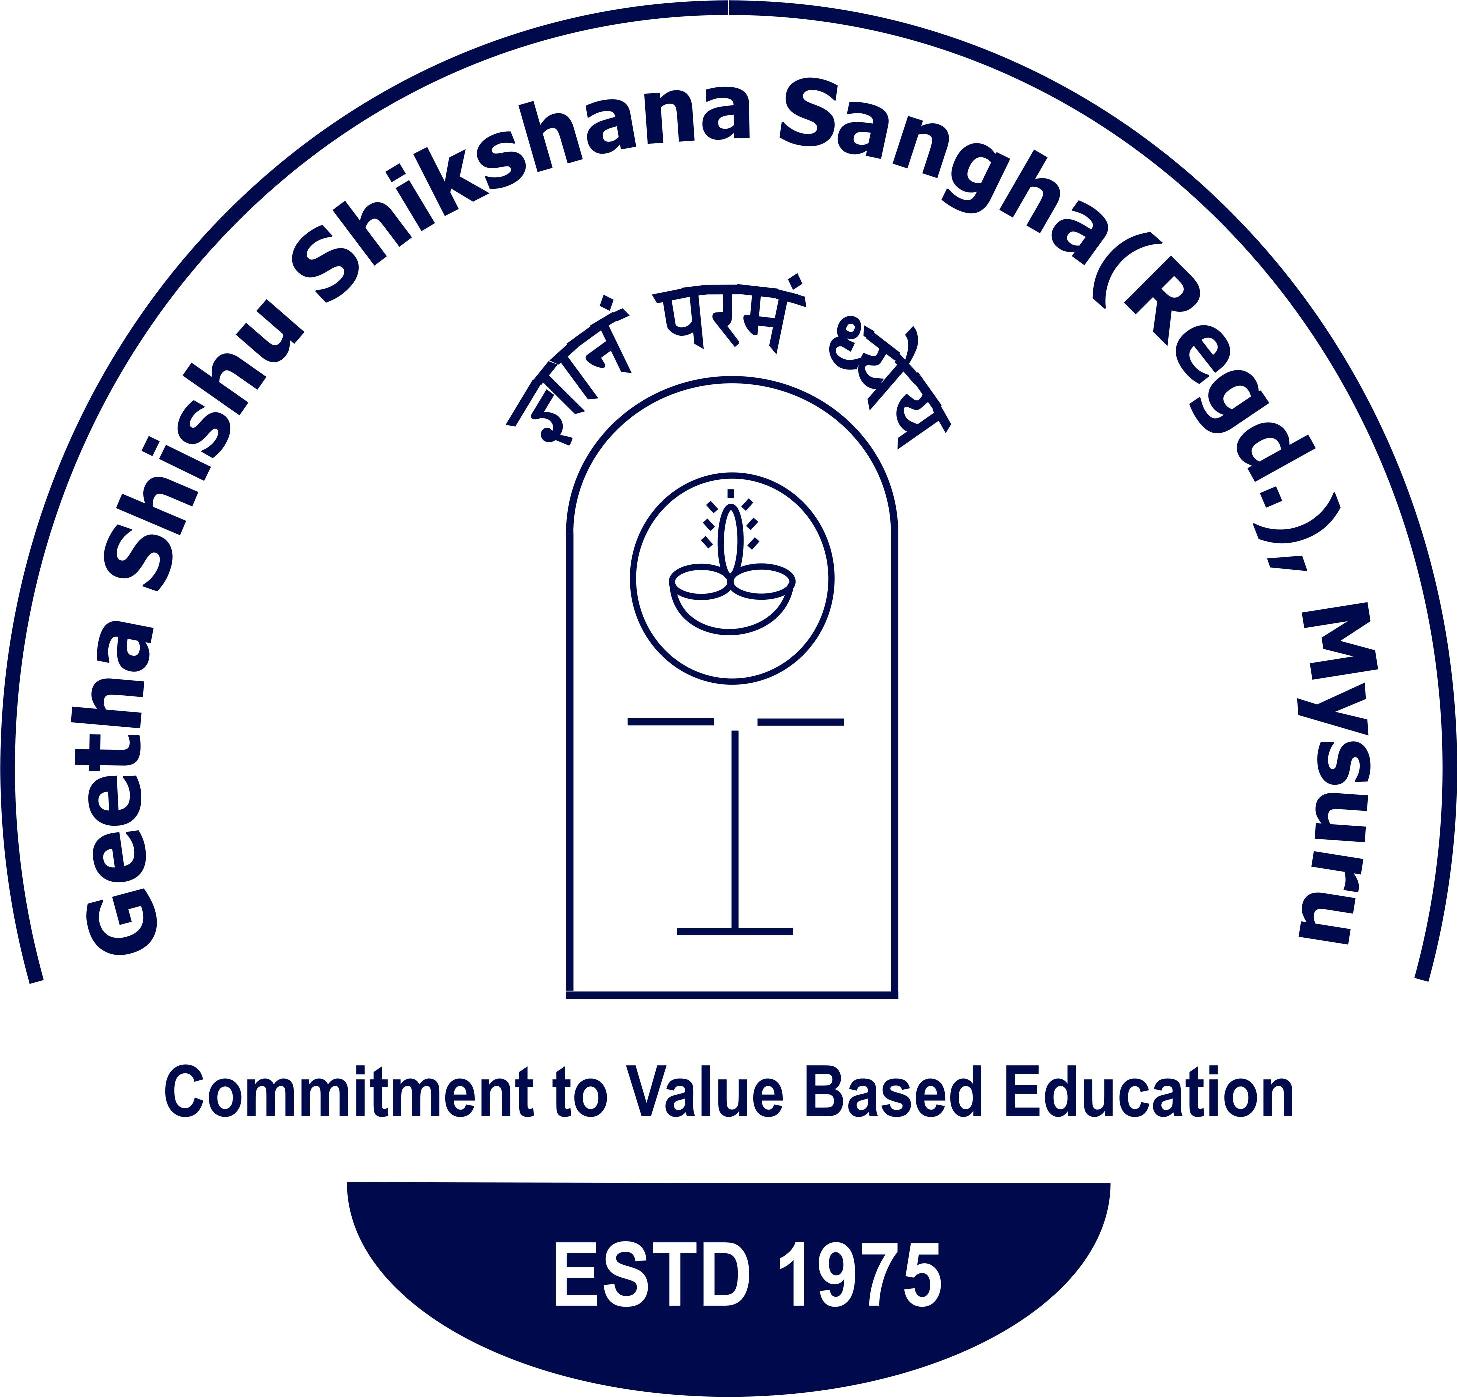 GSSS INSTITUTE OF ENGINEERING AND TECHNOLOGY FOR WOMEN